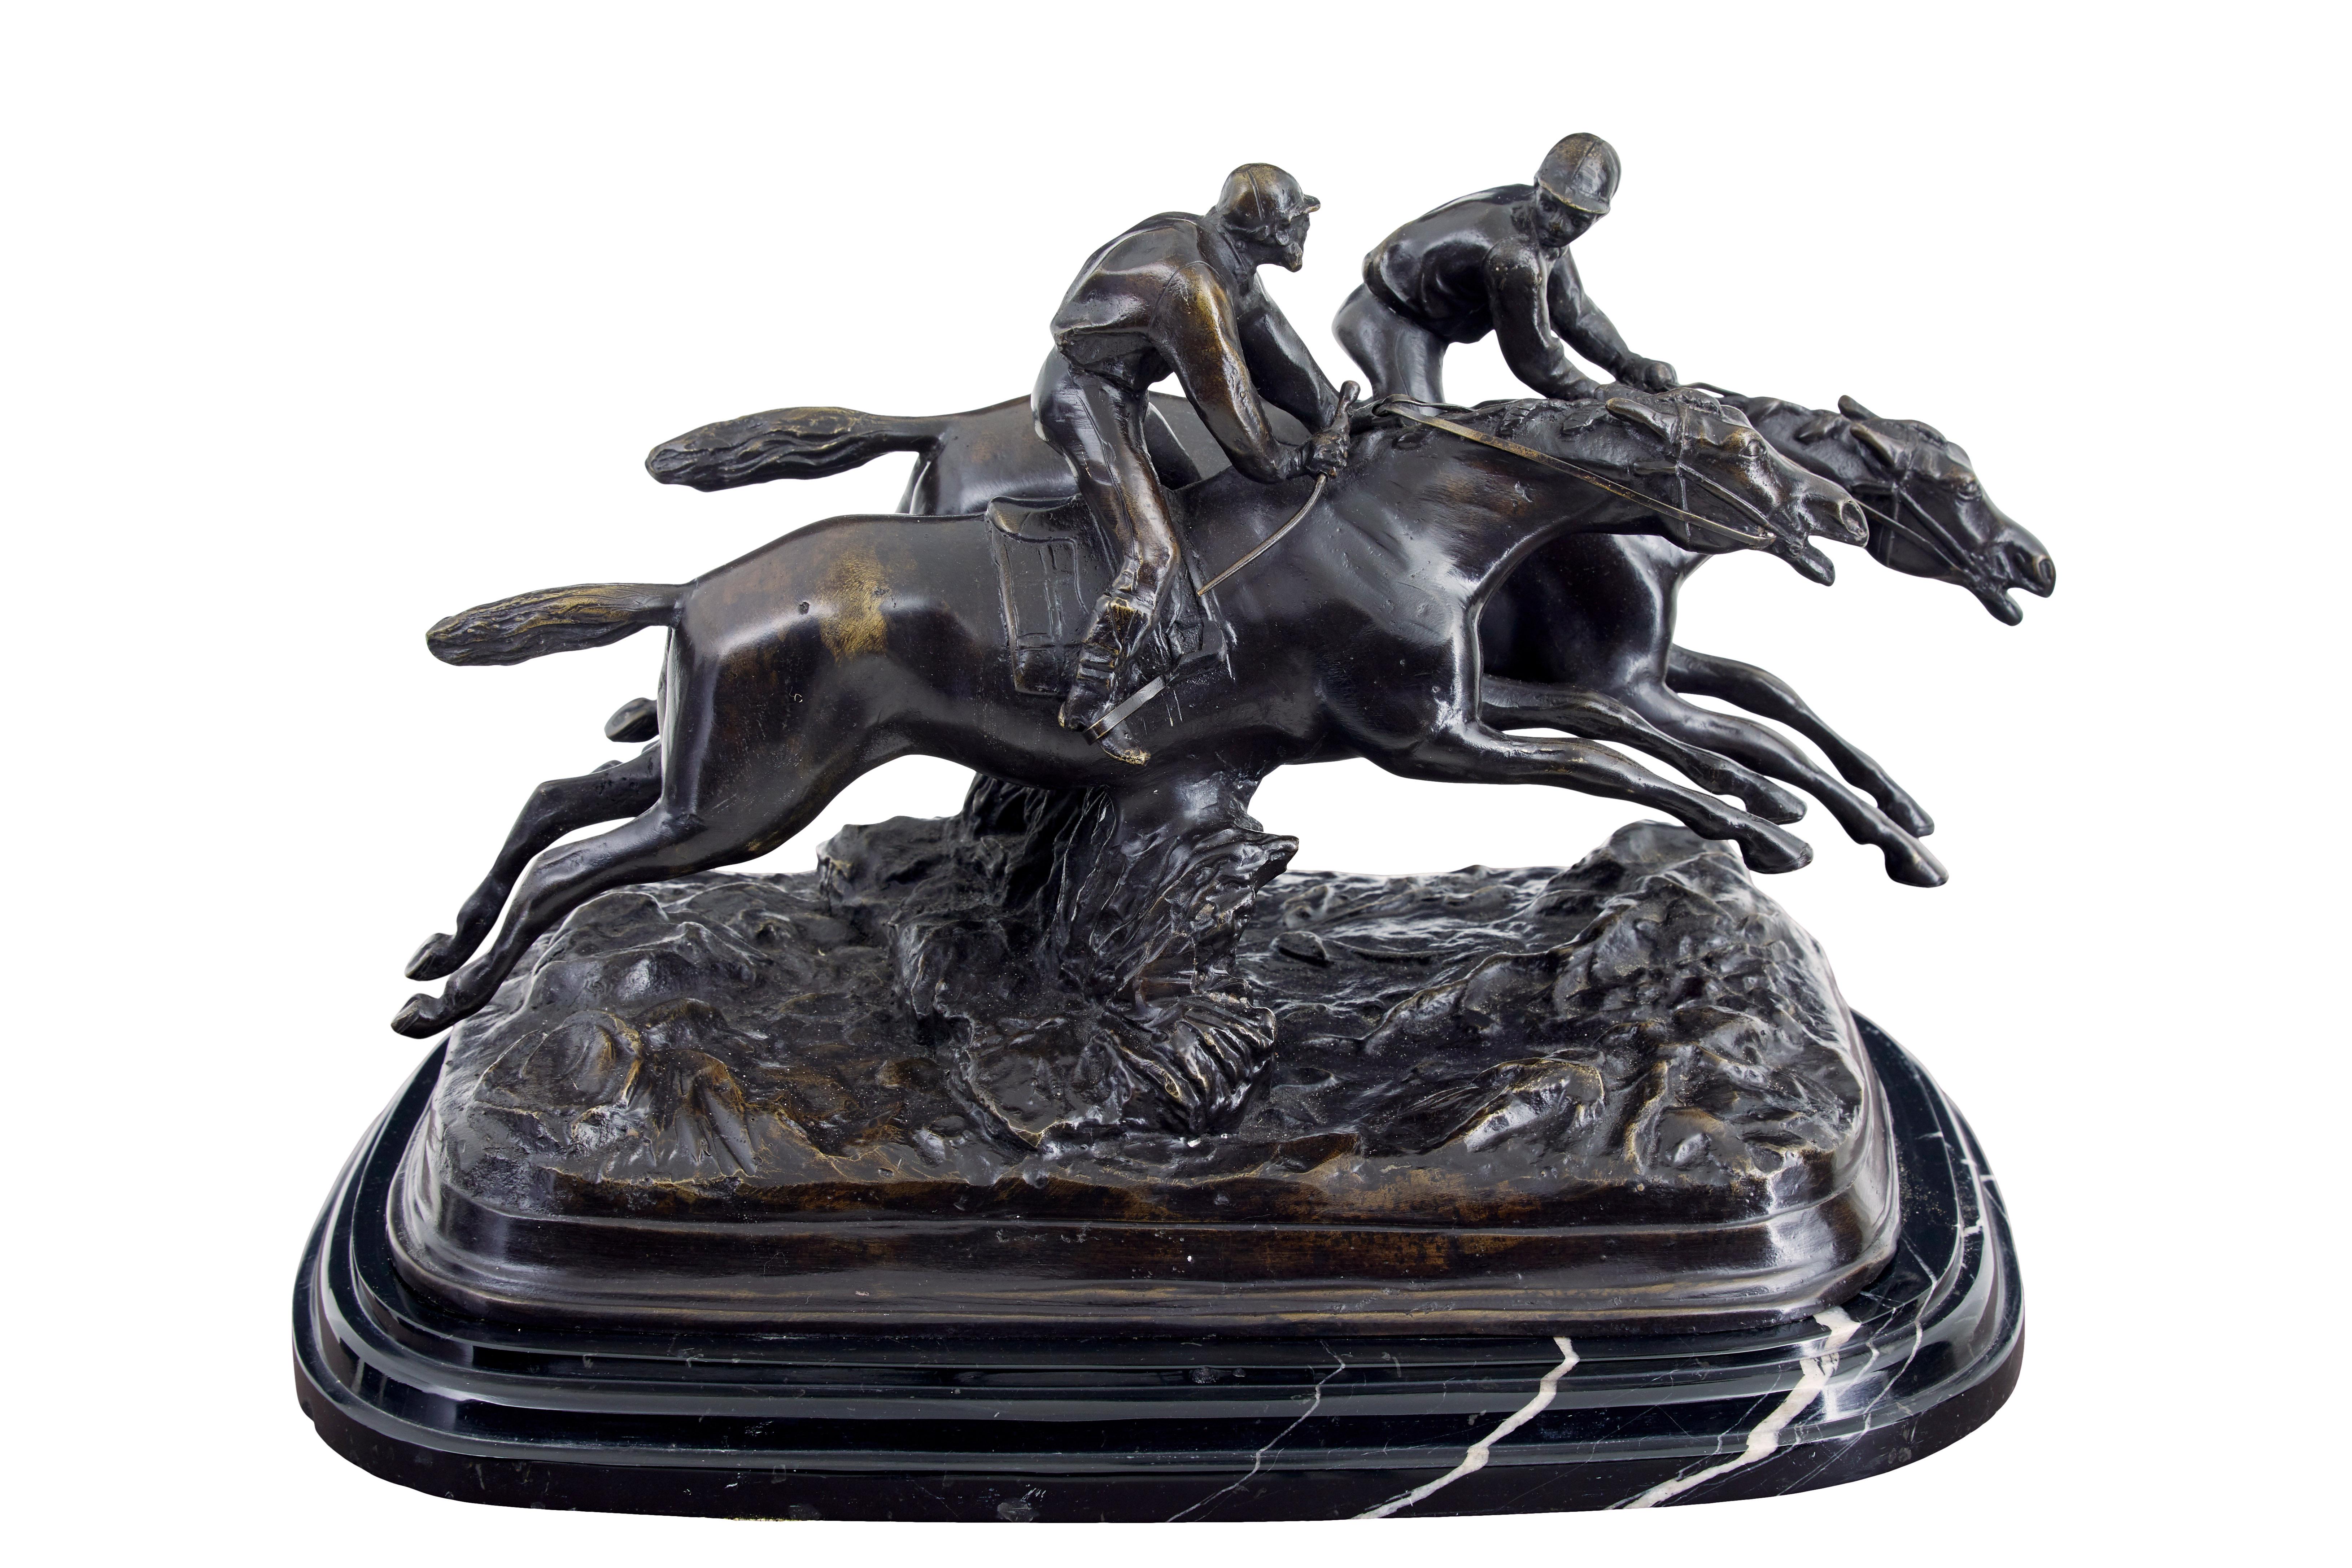 Good quality horse racing desk top bronze circa 1990.

Fine example of a mid sized bronze which we used as shop decoration for many years.  Depicts a pair of horses racing at full gallop with the jockeys looking at each other. This is a reproduction